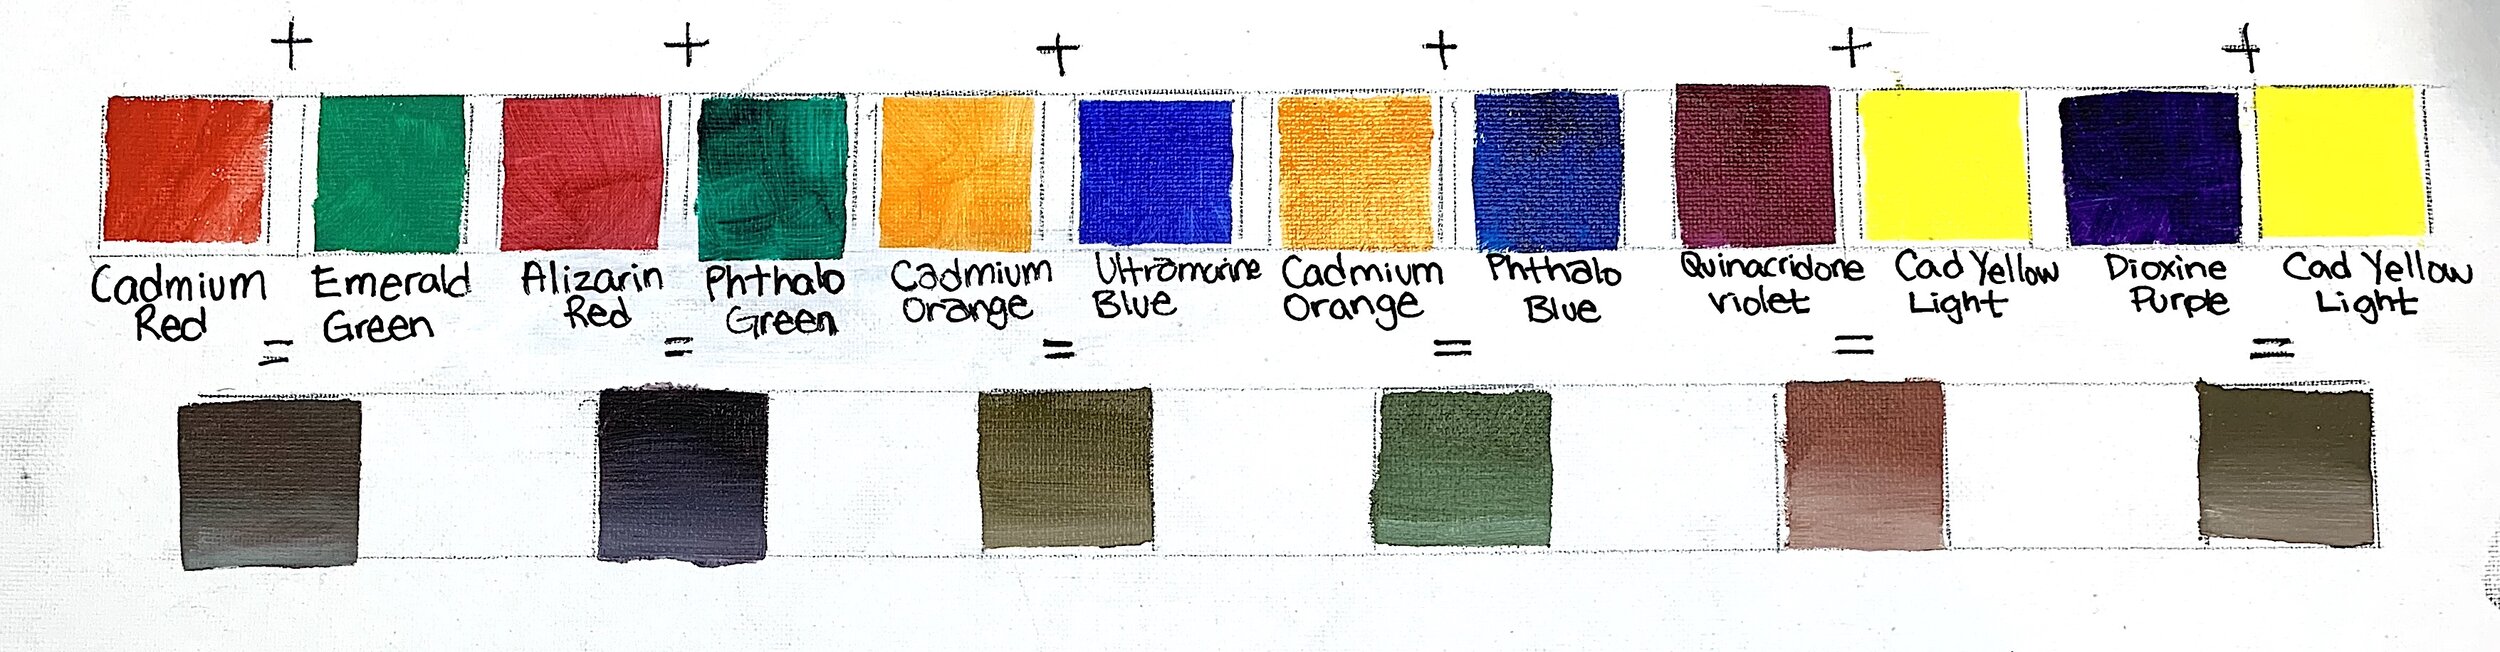 Sinewi Abe Hollywood Making Brown With Basic Color Theory — Mandie Keay